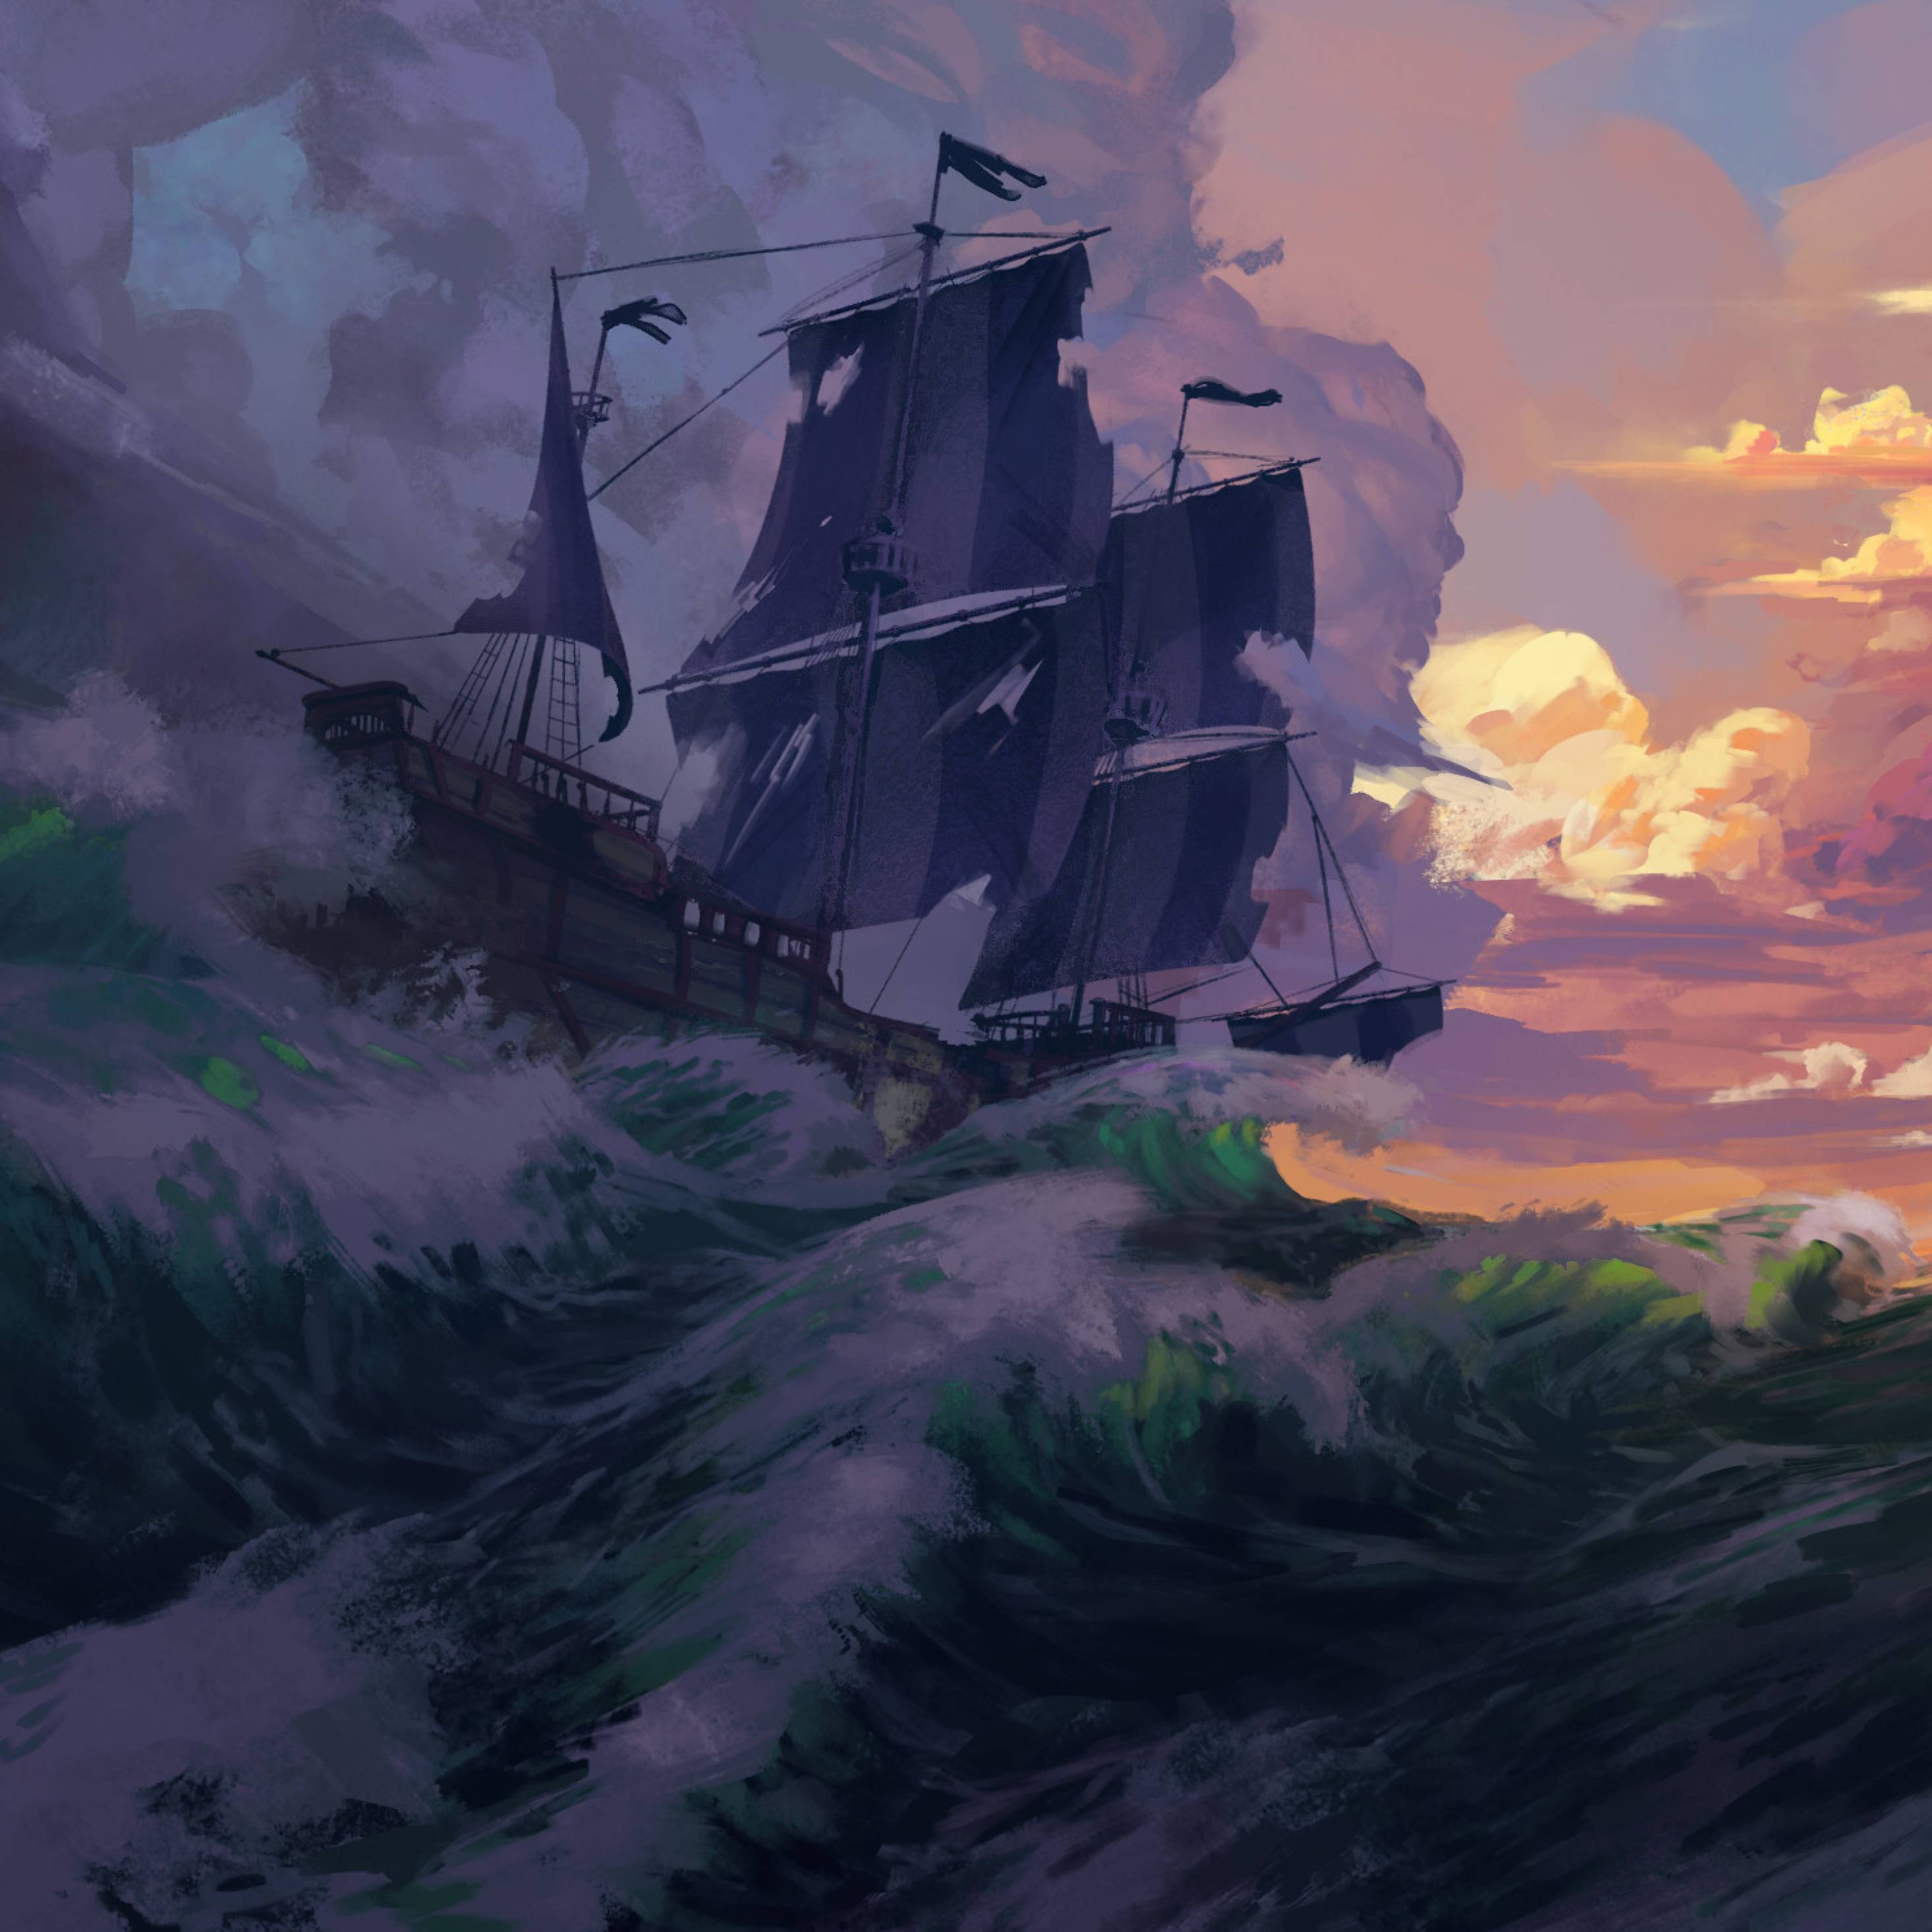 A painting of an old sailing ship on the ocean - Pirate